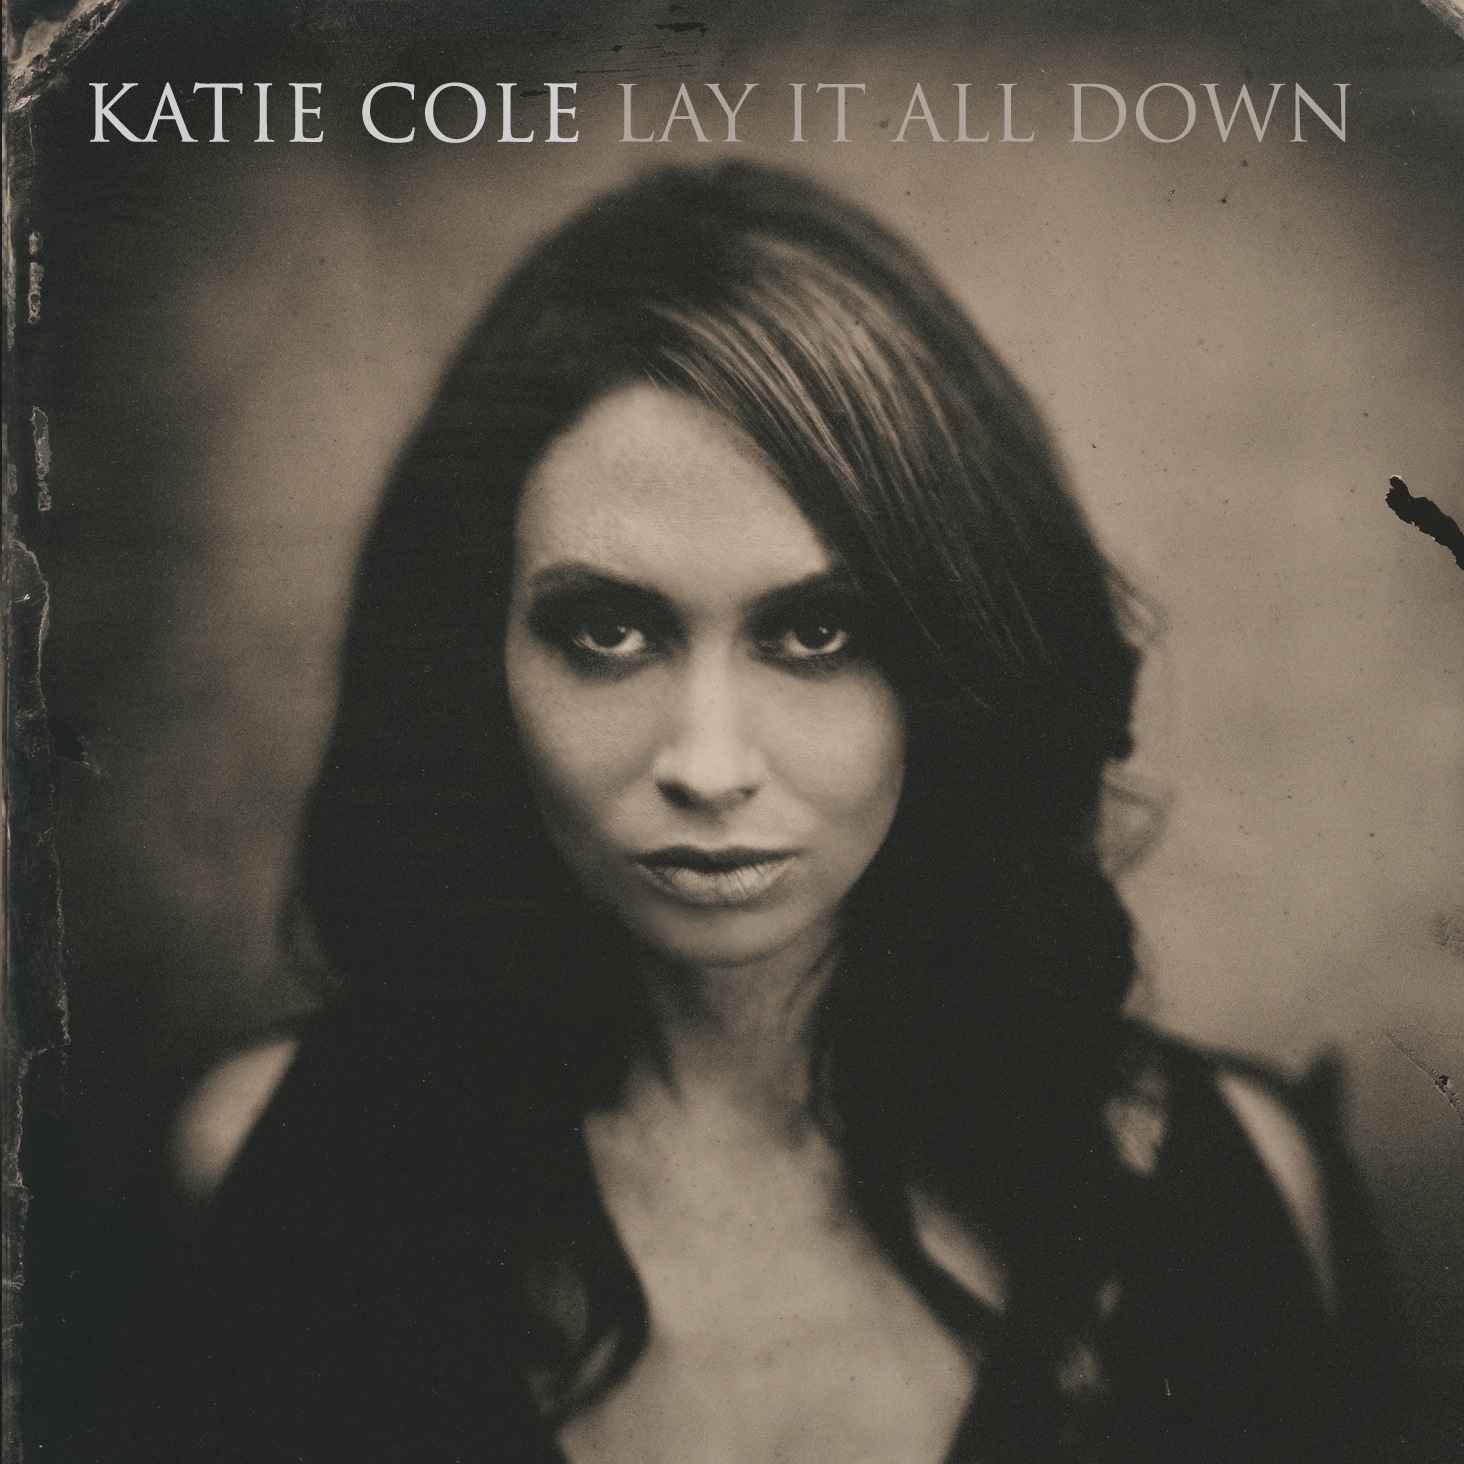 Lay it all down cd cover